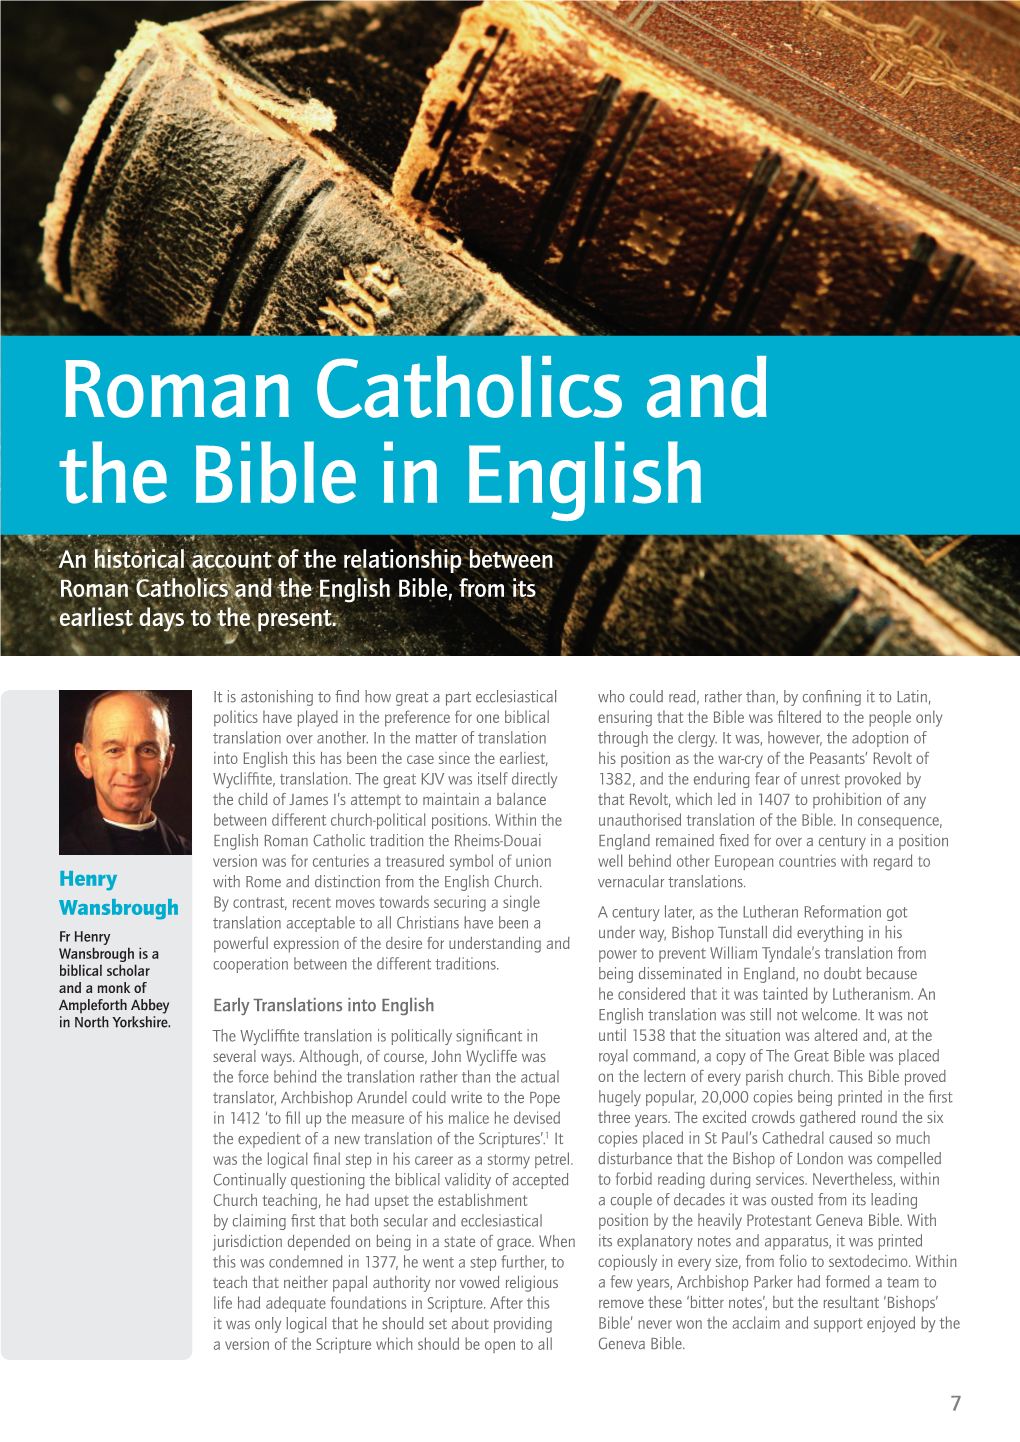 Roman Catholics and the Bible in English